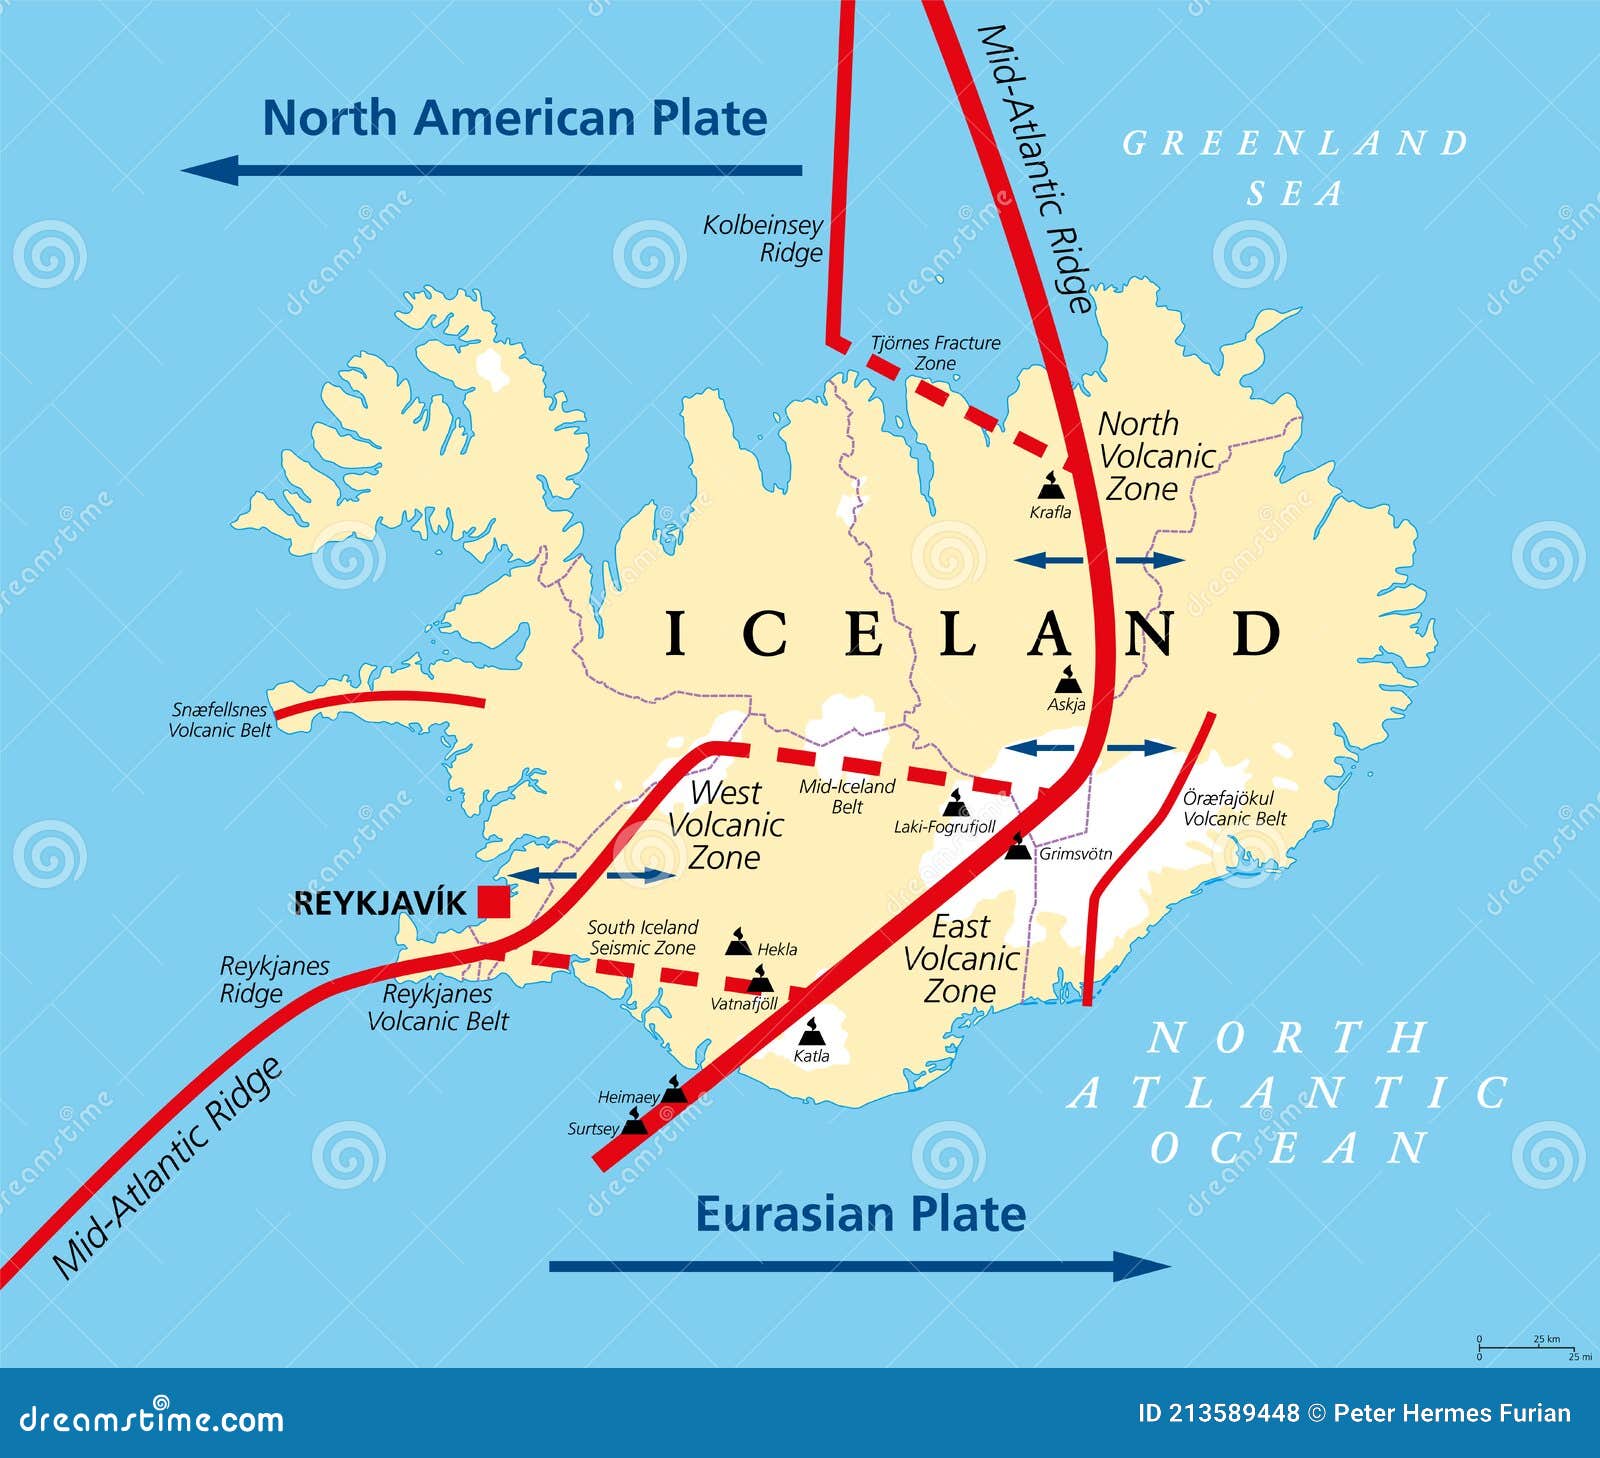 geology of iceland, eurasian and north american plate, political map